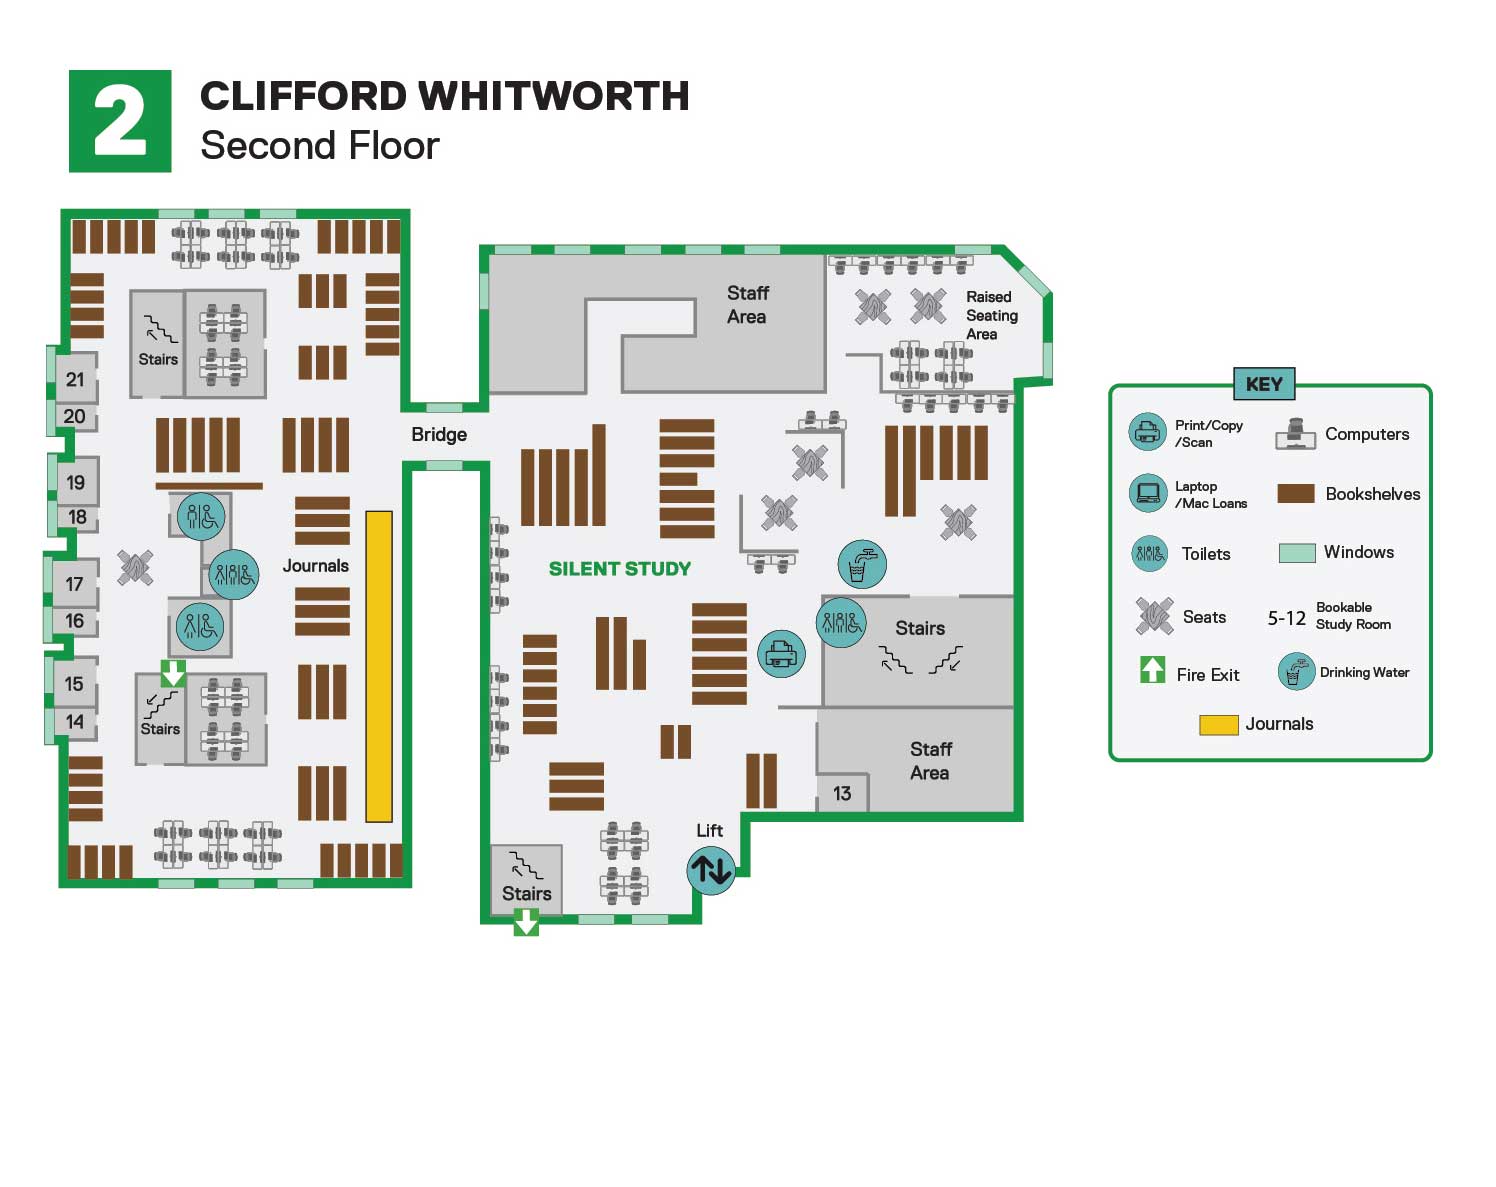 Map of the second floor of the Clifford Whitworth Library